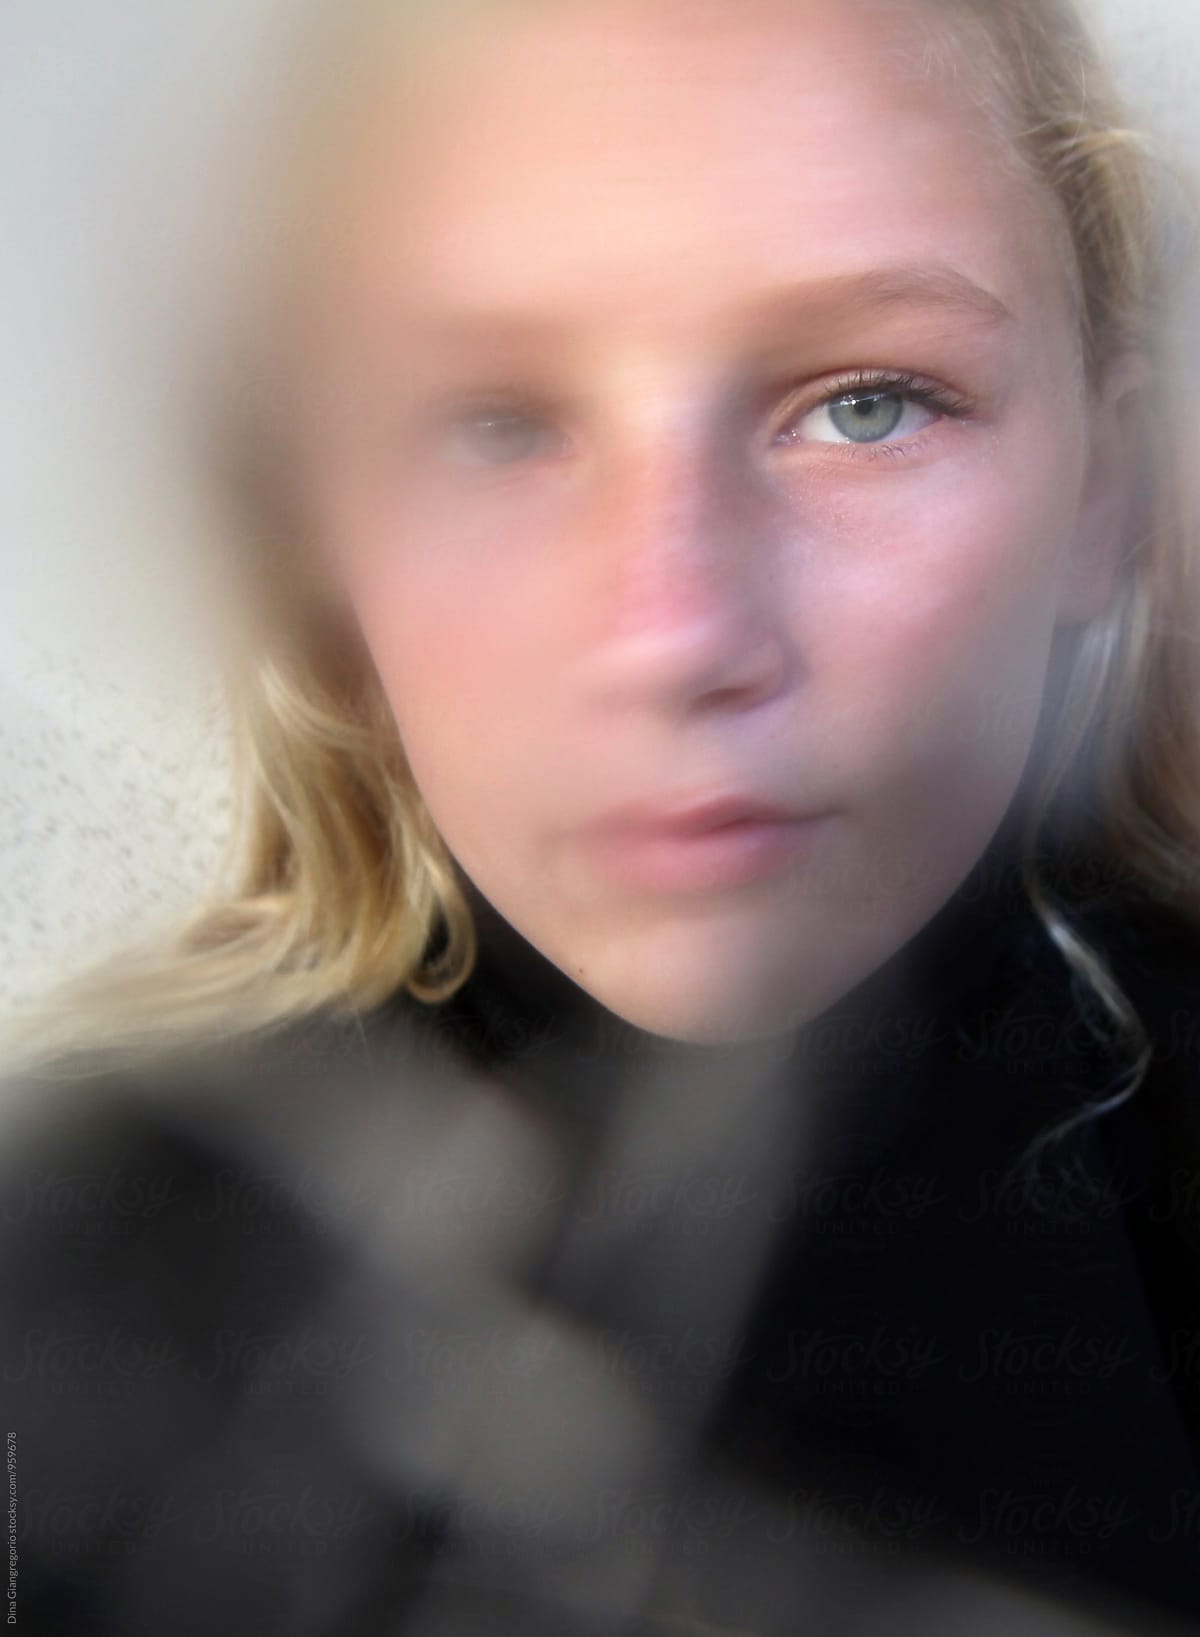 Untraditional Portrait Of Teenager With Beautiful Eyes By Stocksy Contributor Dina Marie